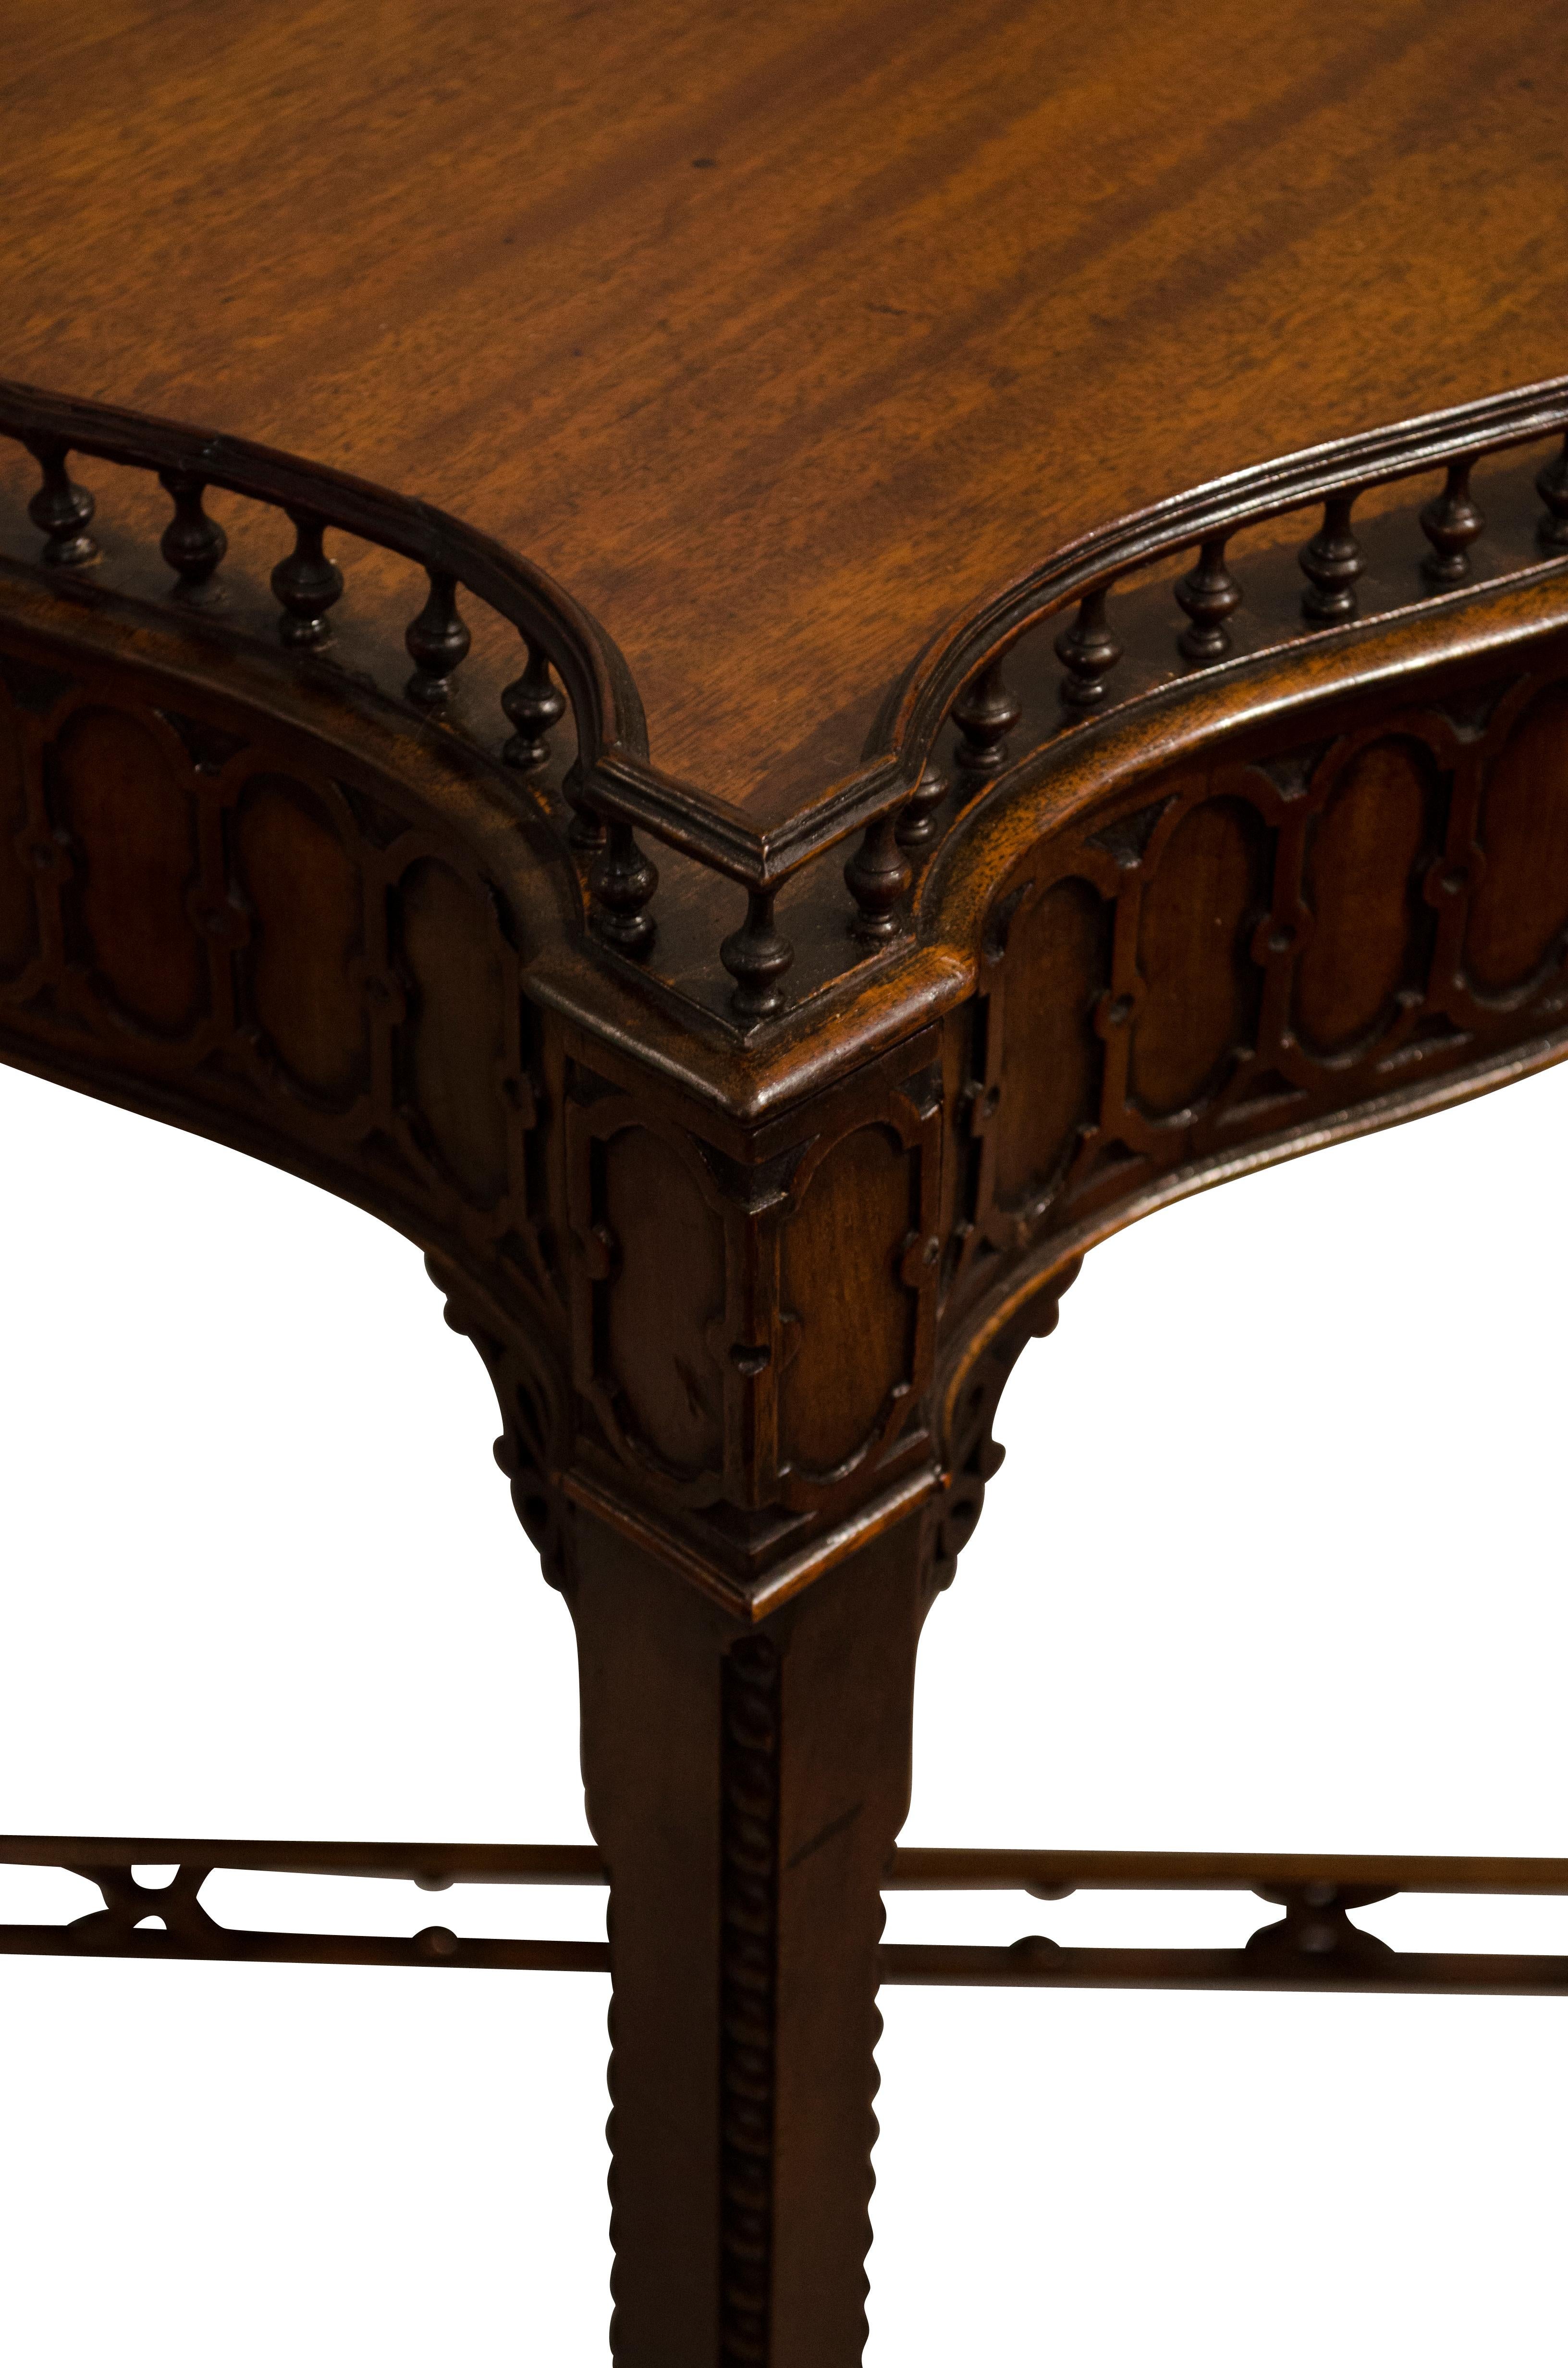 George III style 19th century serpentine sided mahogany table with spindled gallery top,
circa 1890.